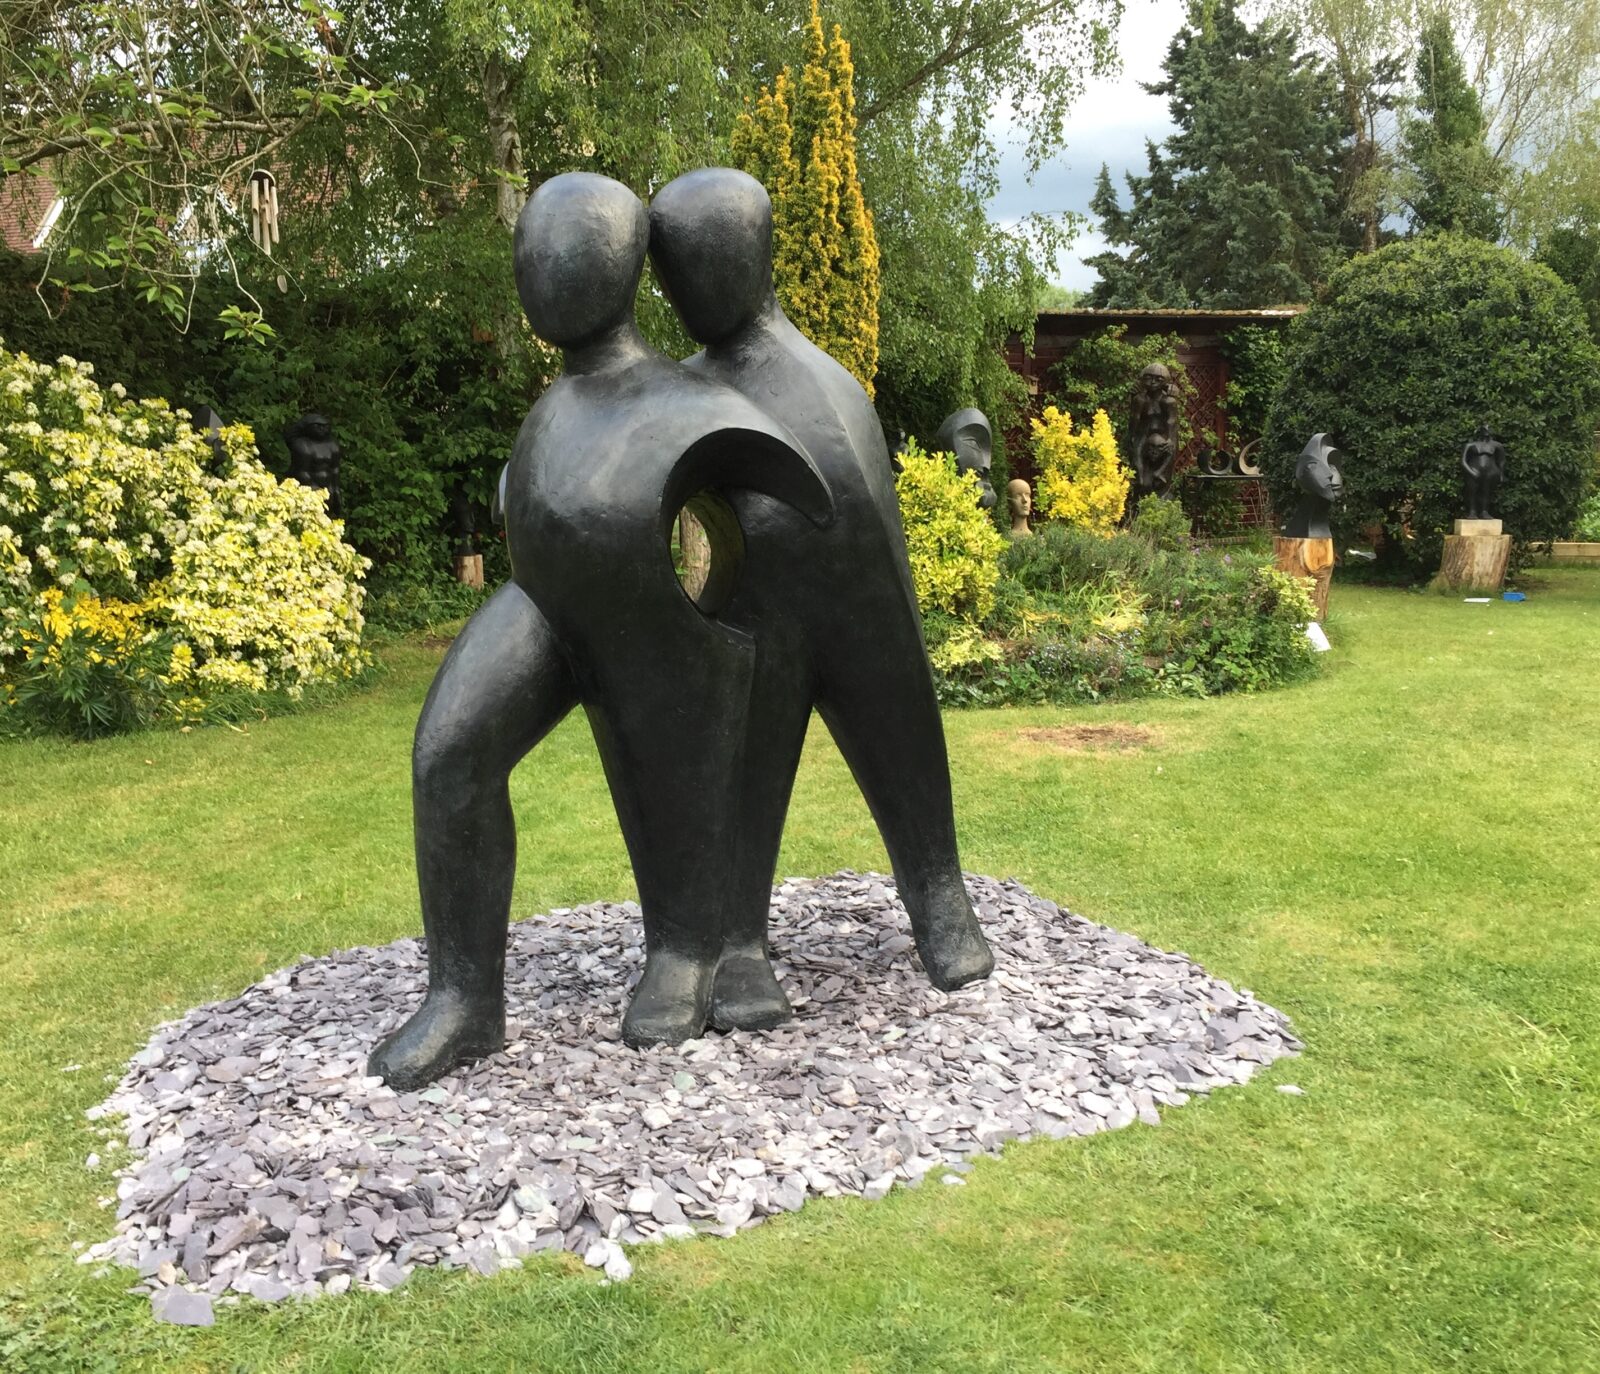 Different views of a life size sculpture of two abstracted figures for a public communal space